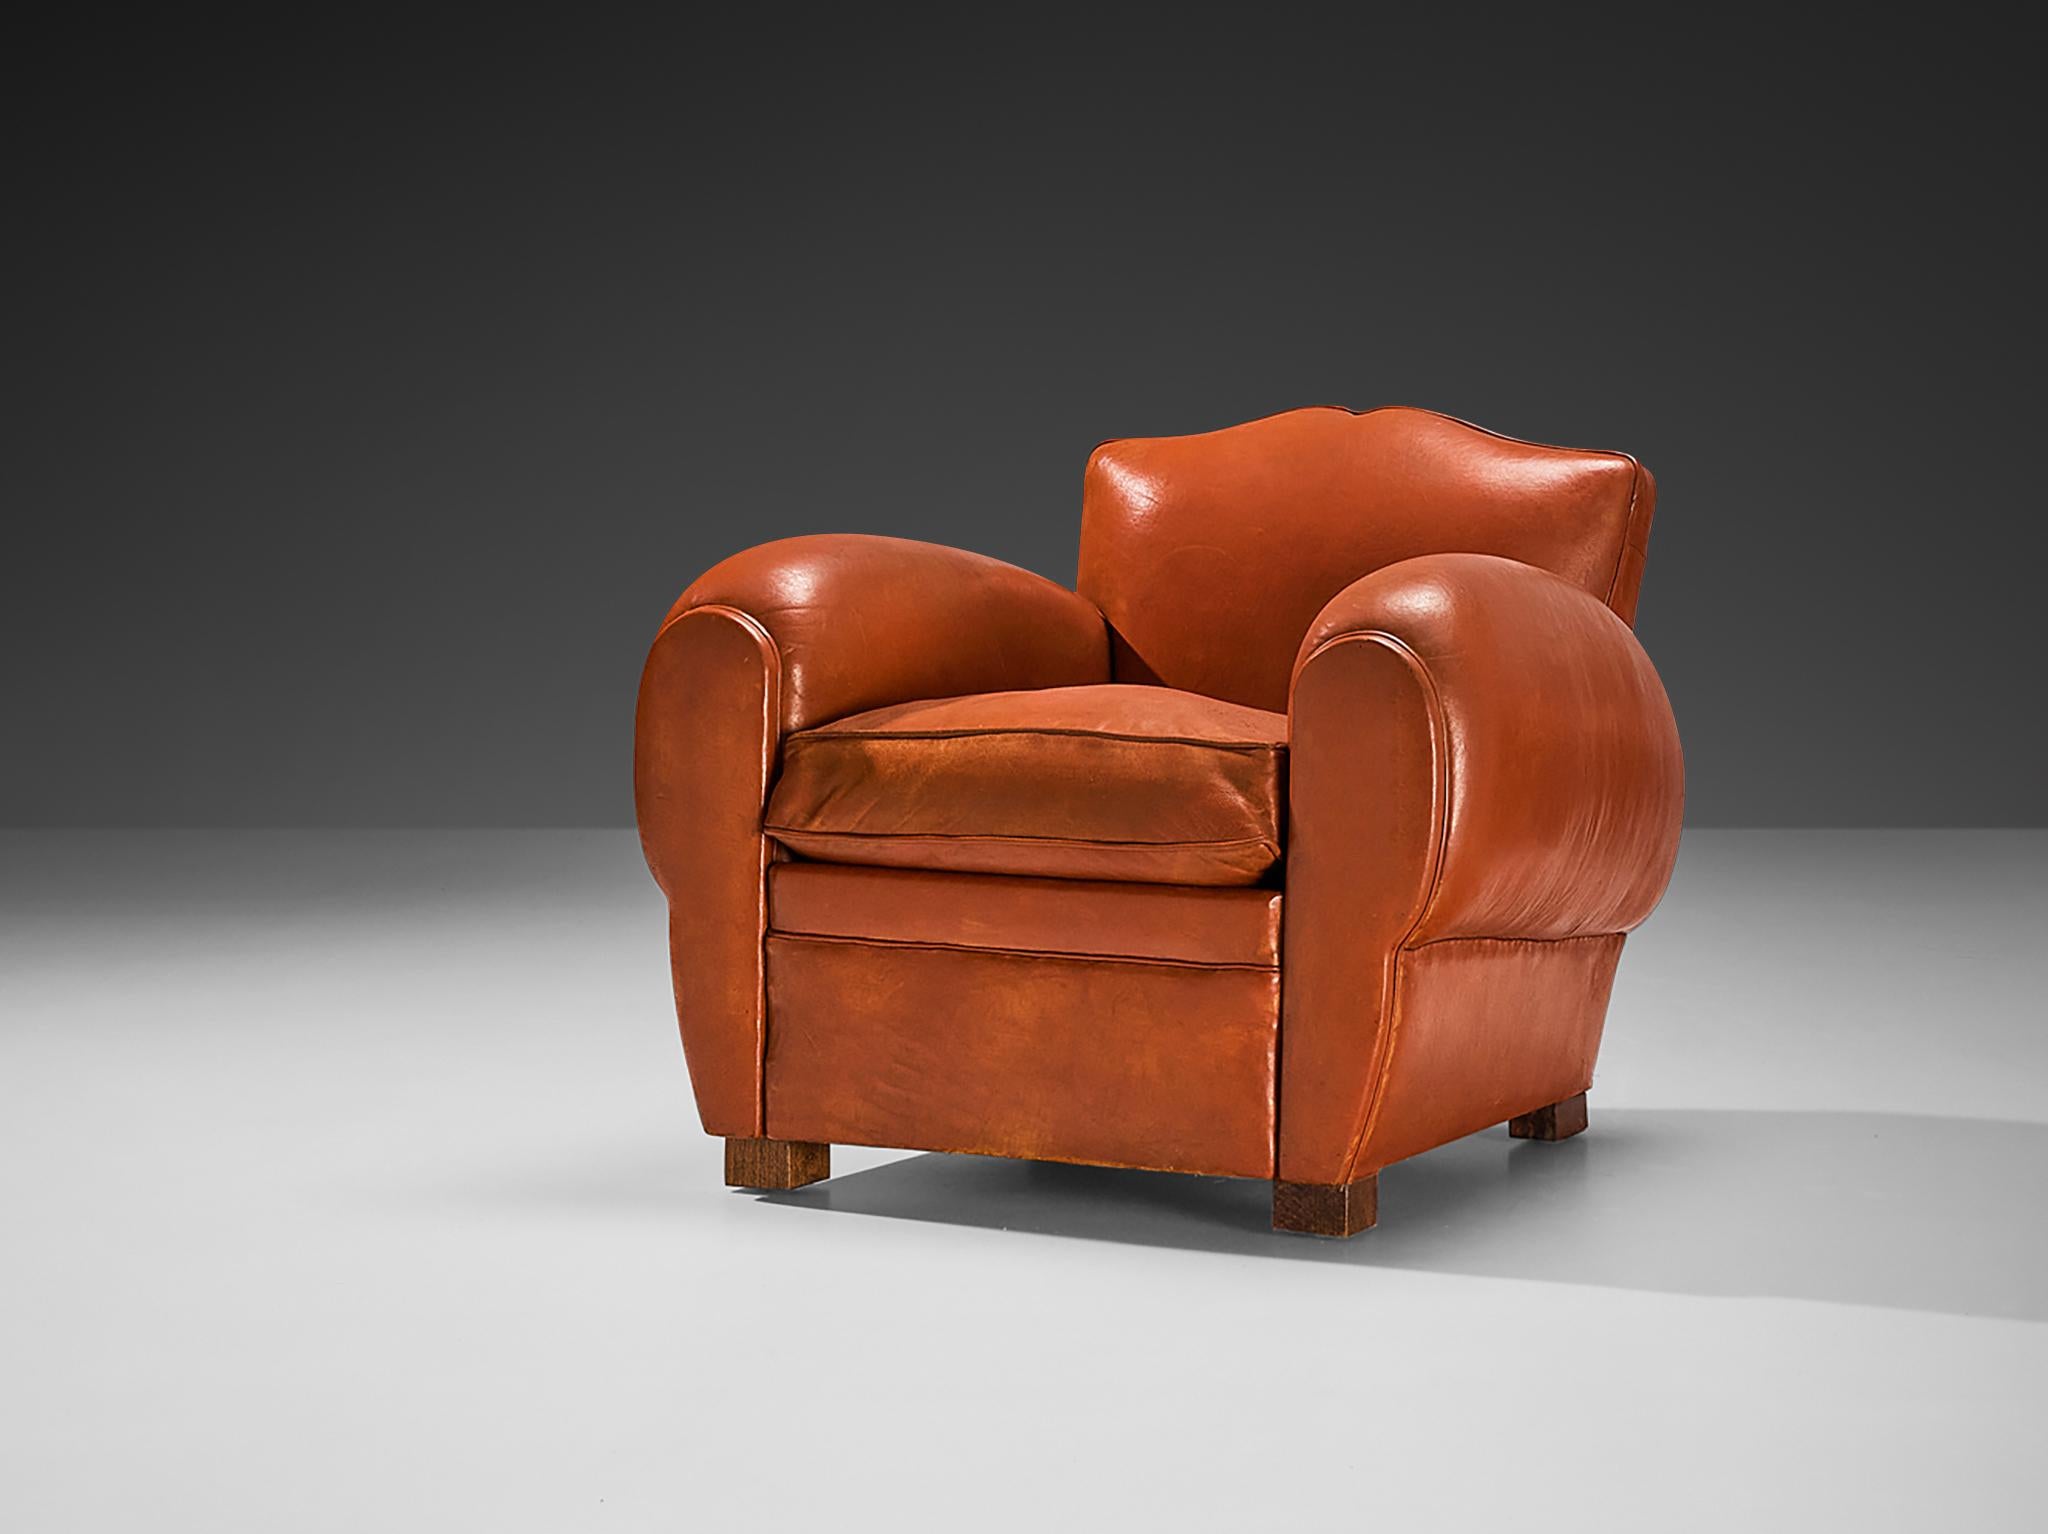 Maurice Rinck, lounge chair, reddish brown leather, beech, France, 1940s

Grand and comfortable club chair in leather upholstery. Truly extraordinary and luxurious chair that features a deep seat and large rounded, curved armrests. The backrests are